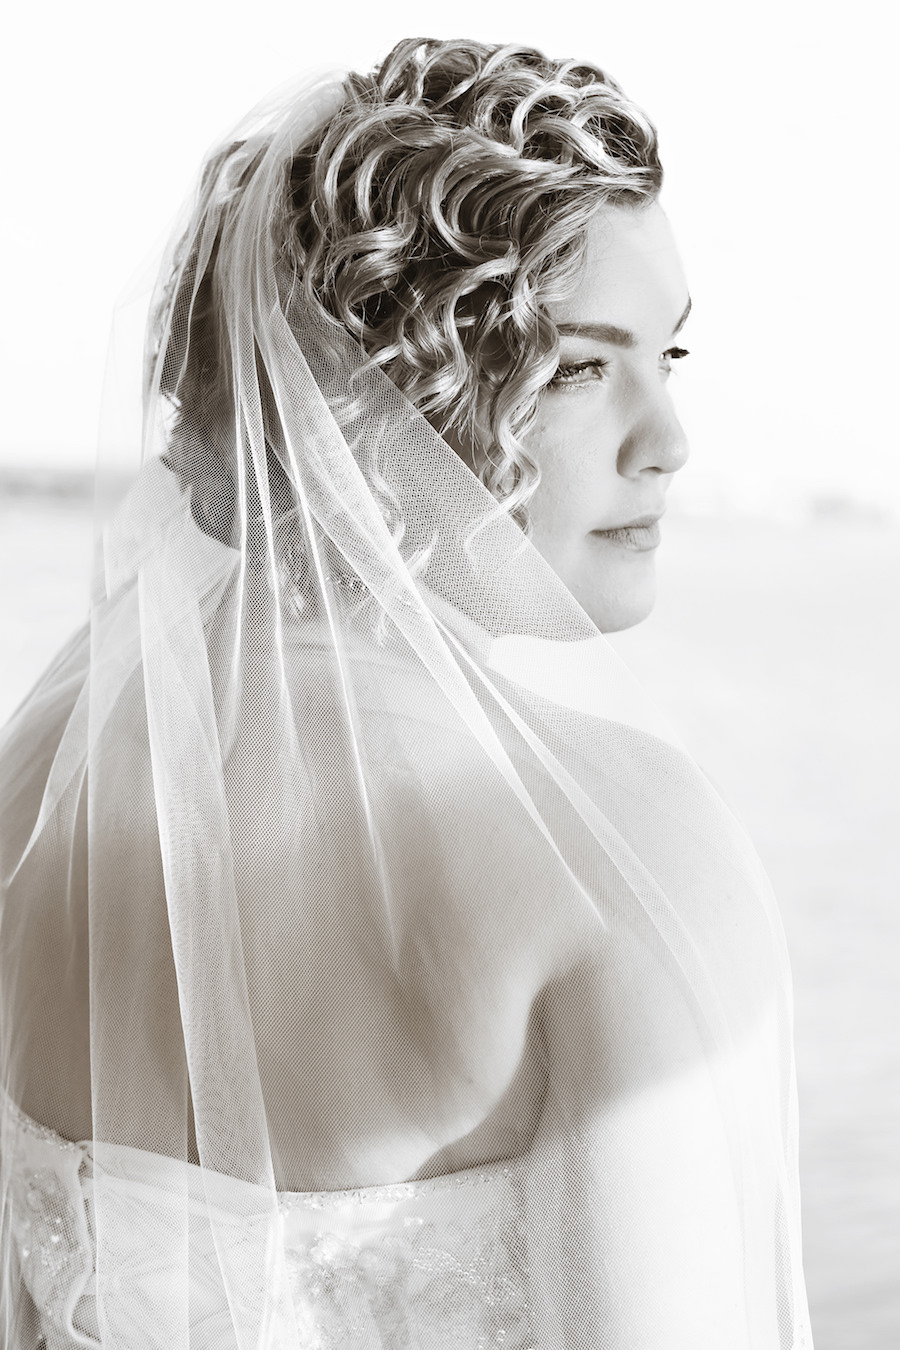 Curly, Wavy, Bridal Hair and Makeup Wedding Portrait with Wedding Veil